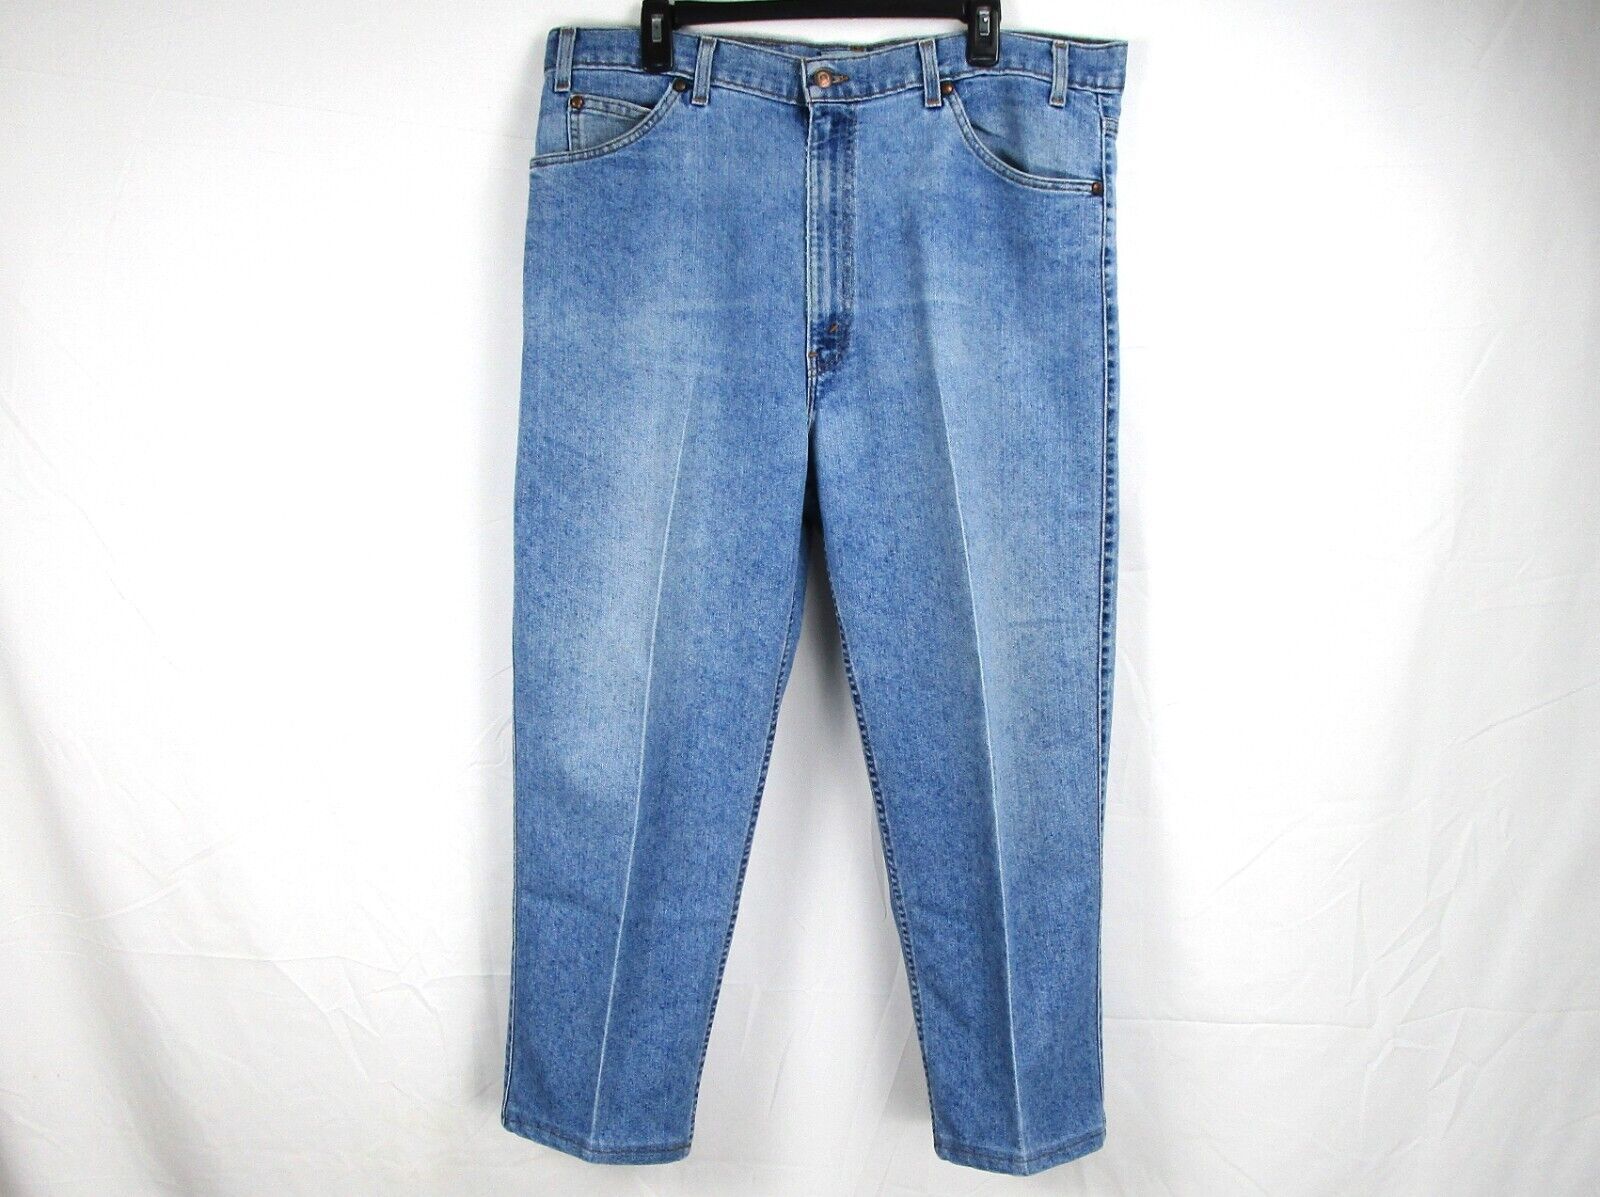 Primary image for Levi's 540 Relaxed Fit Blue Jeans Men's 40 W x 25.5 Inseam Blue Denim Pants